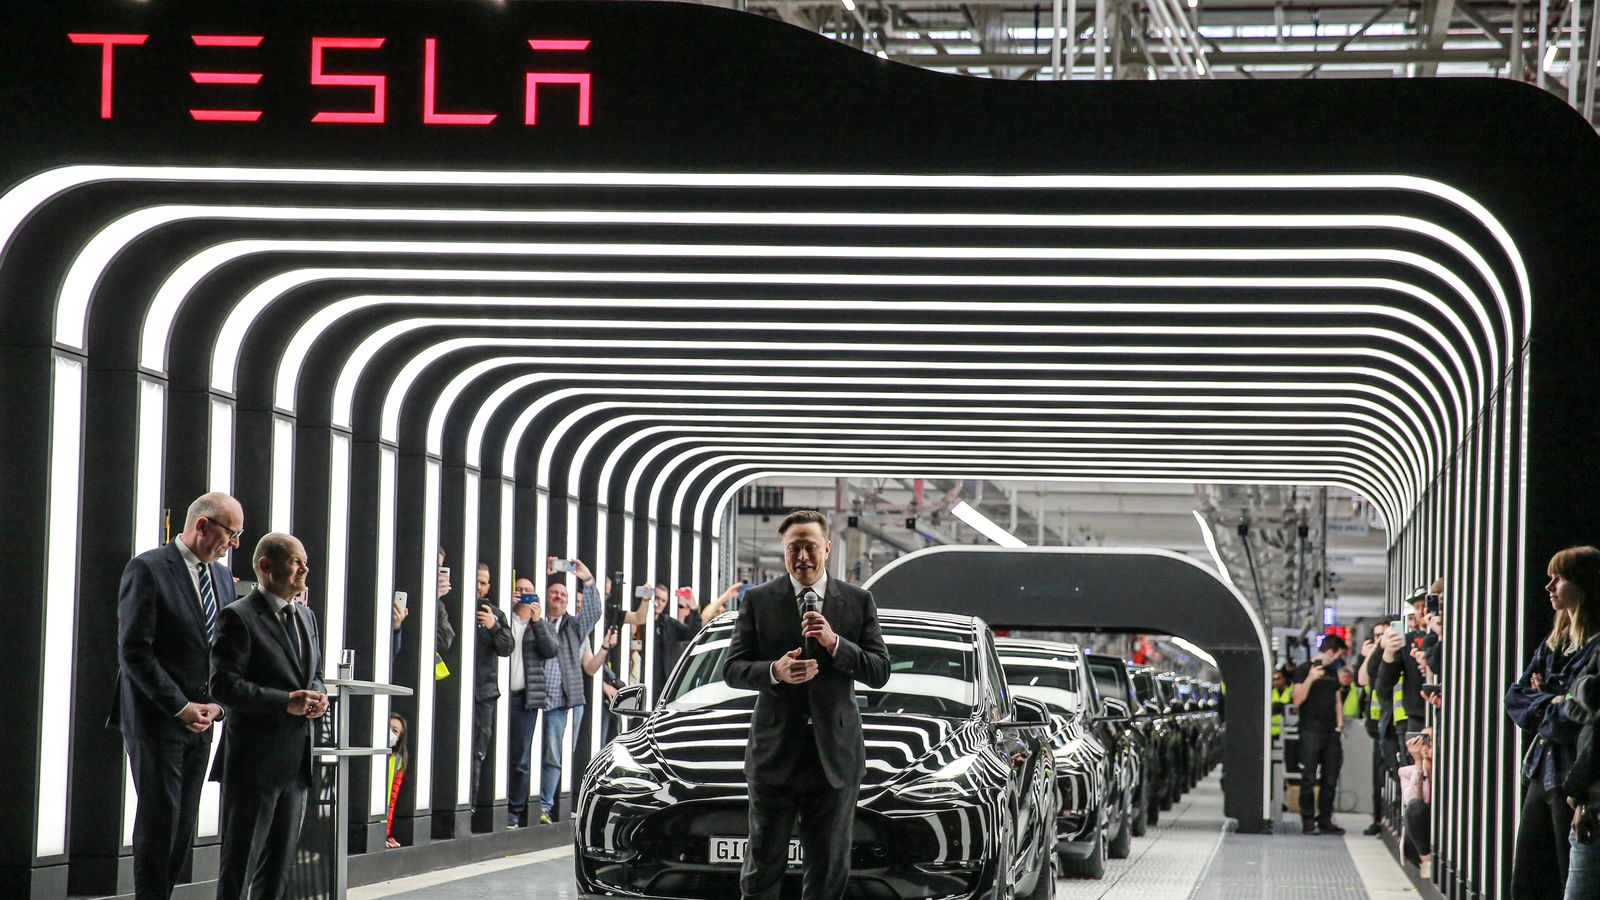 Tesla opens its first manufacturing factory in Europe